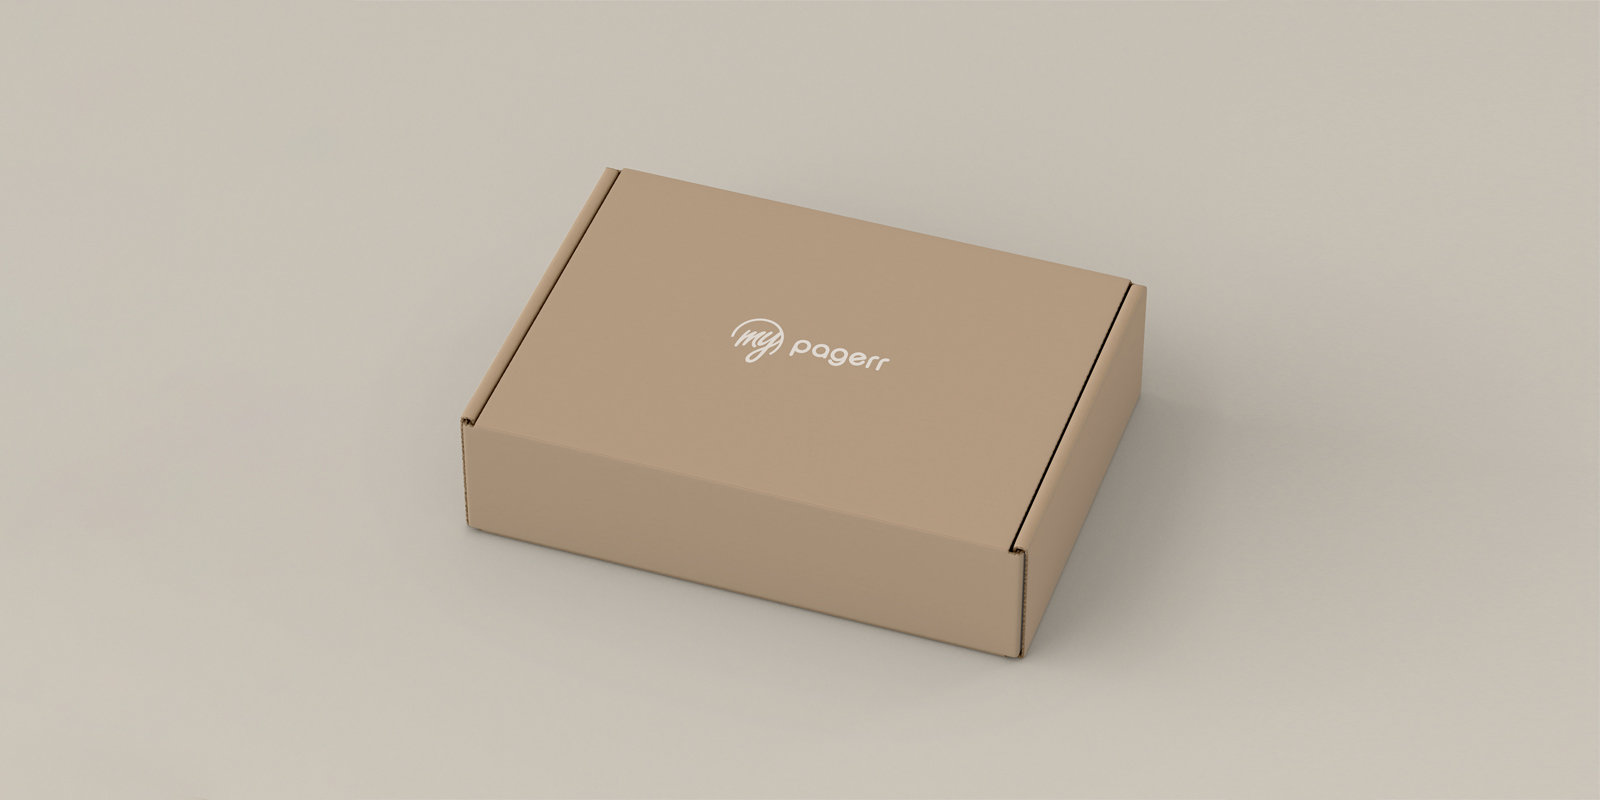 Bespoke boxes in Ballarat - Print with Pagerr